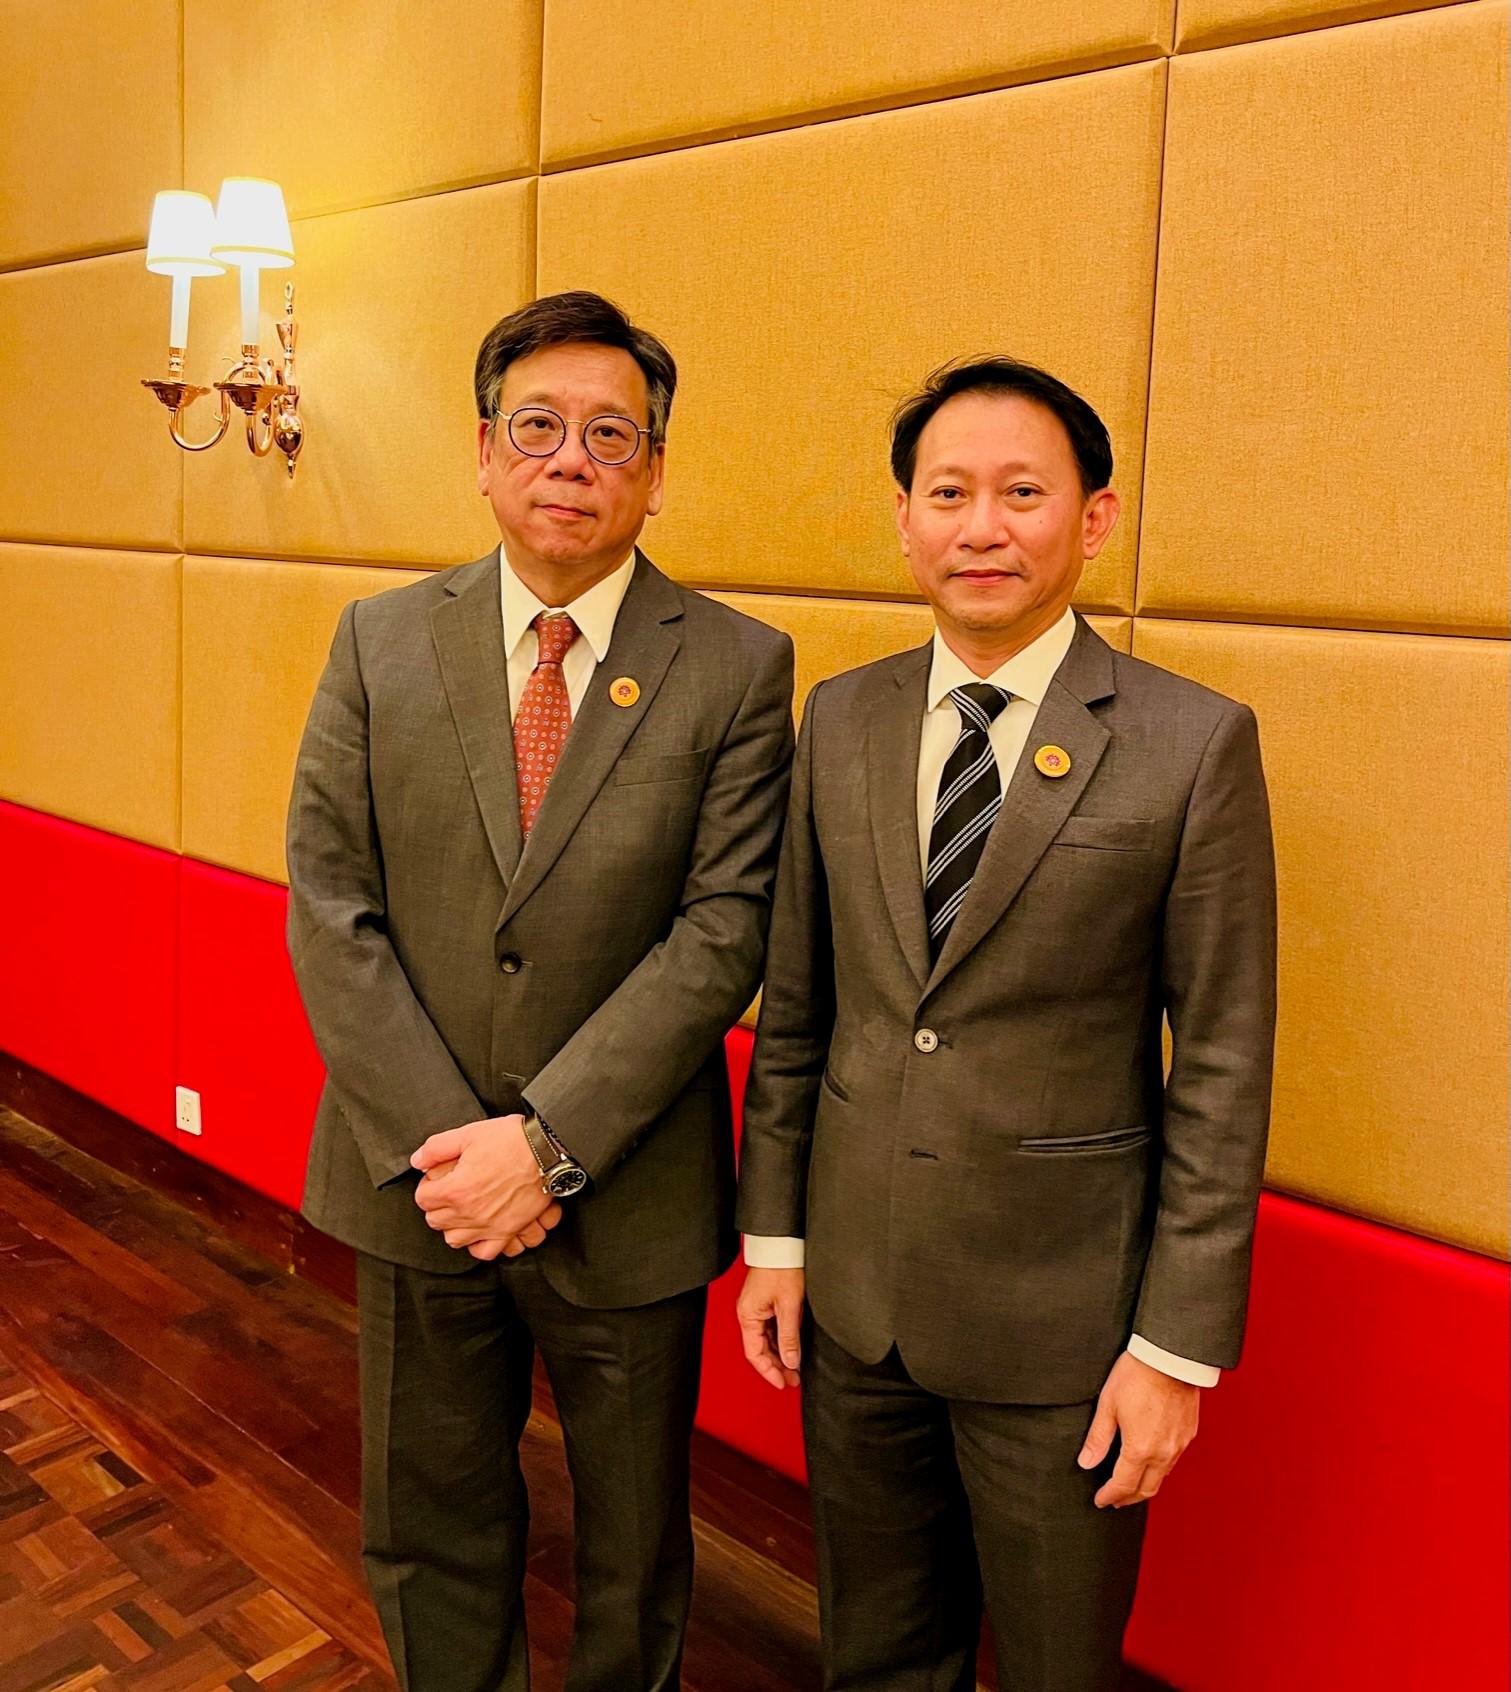 The Secretary for Commerce and Economic Development, Mr Algernon Yau (left), had a bilateral meeting with the Vice Minister for Commerce of Thailand, Dr Sansern Samalapa (right), before attending the gala dinner of the Association of Southeast Asian Nations Economic Ministers' Meeting in Siem Reap, Cambodia, yesterday (September 16).